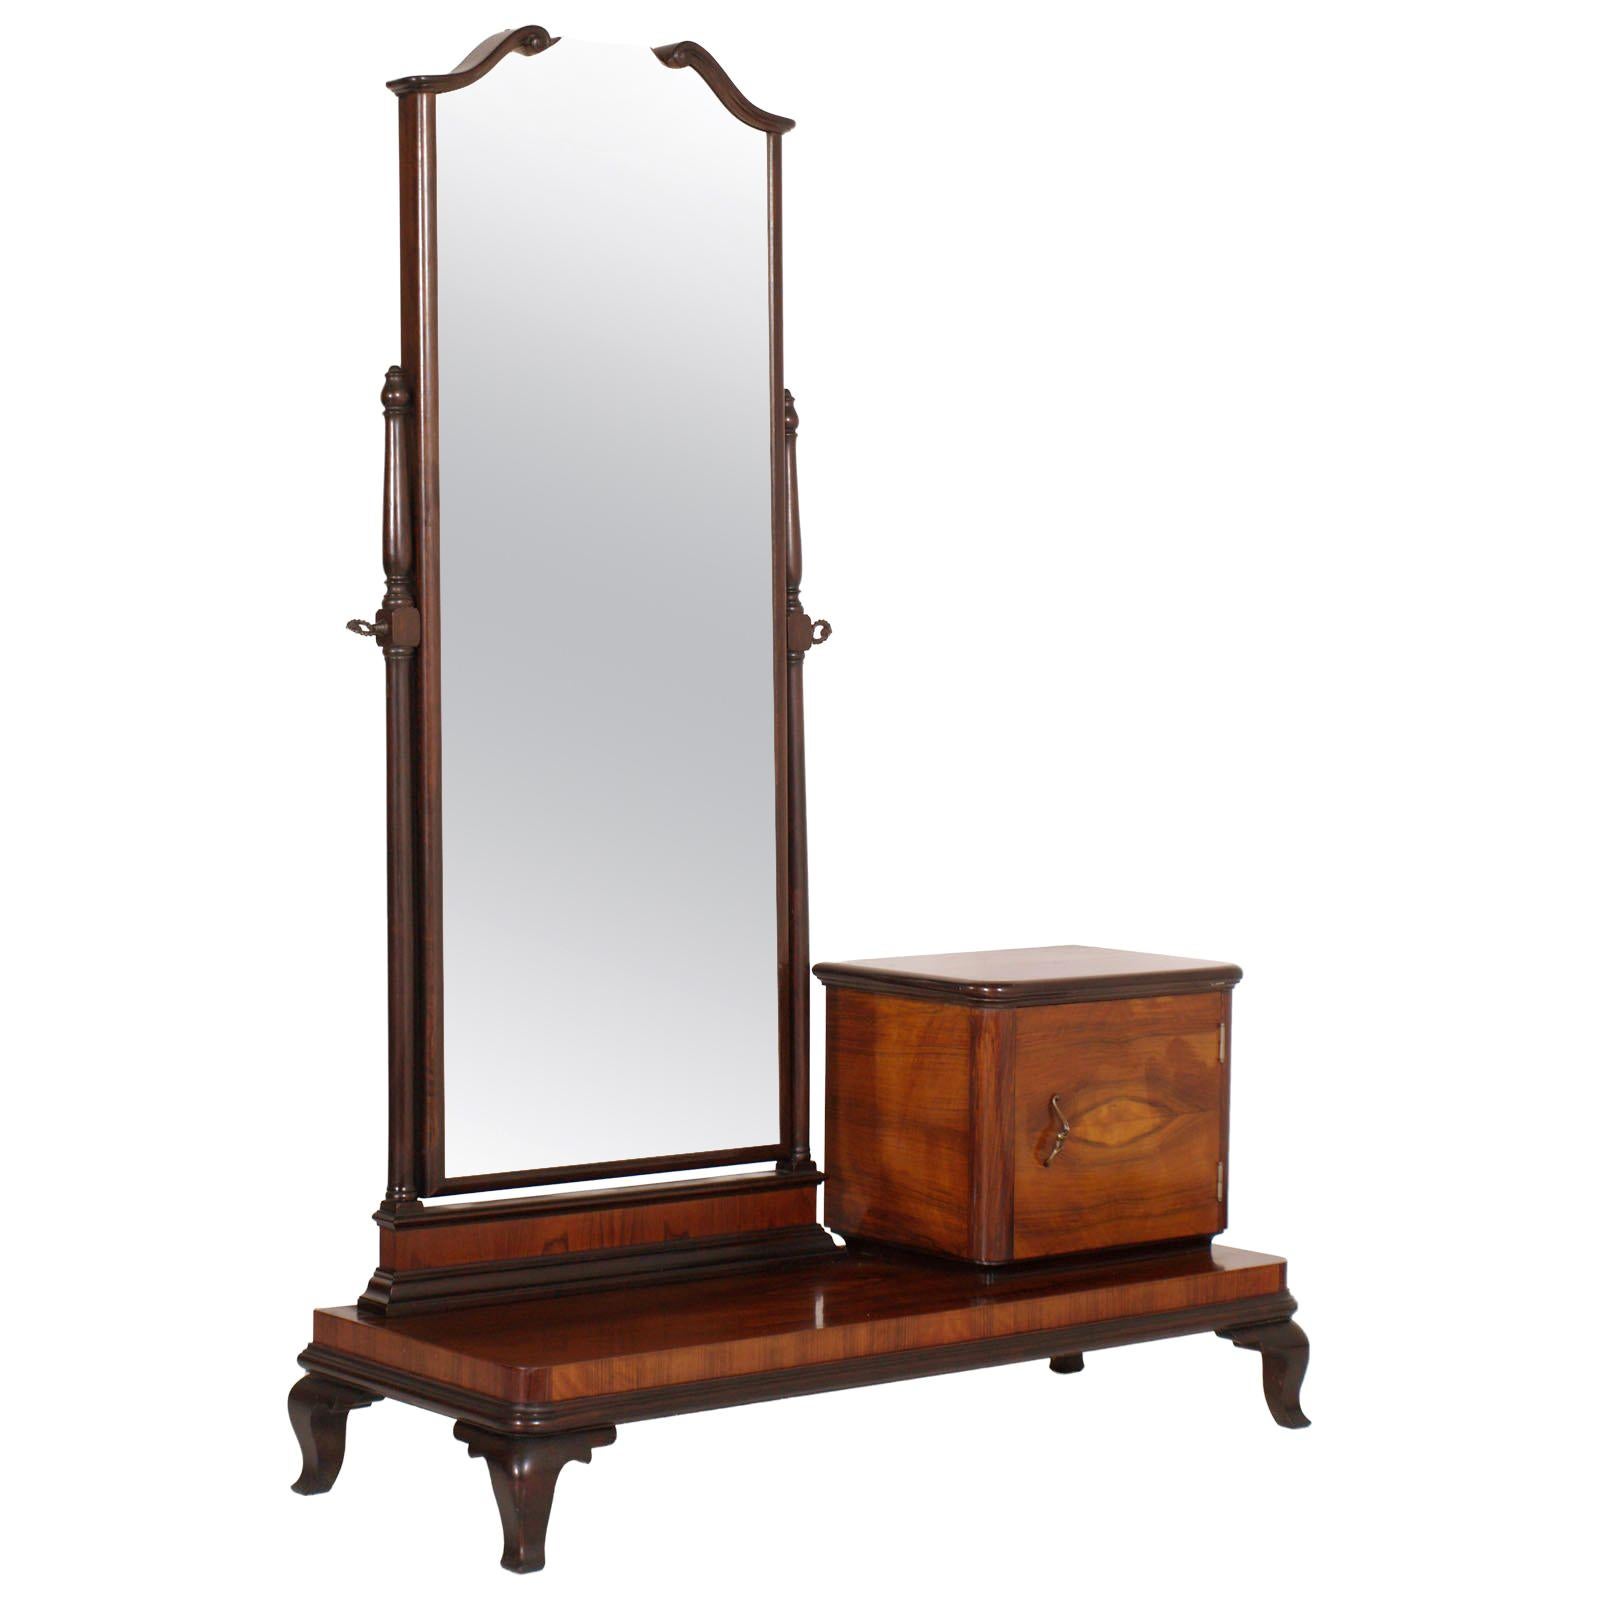 1900s Vanity Console Art Nouveau with Original Beveled Mirror in Walnut and Burl